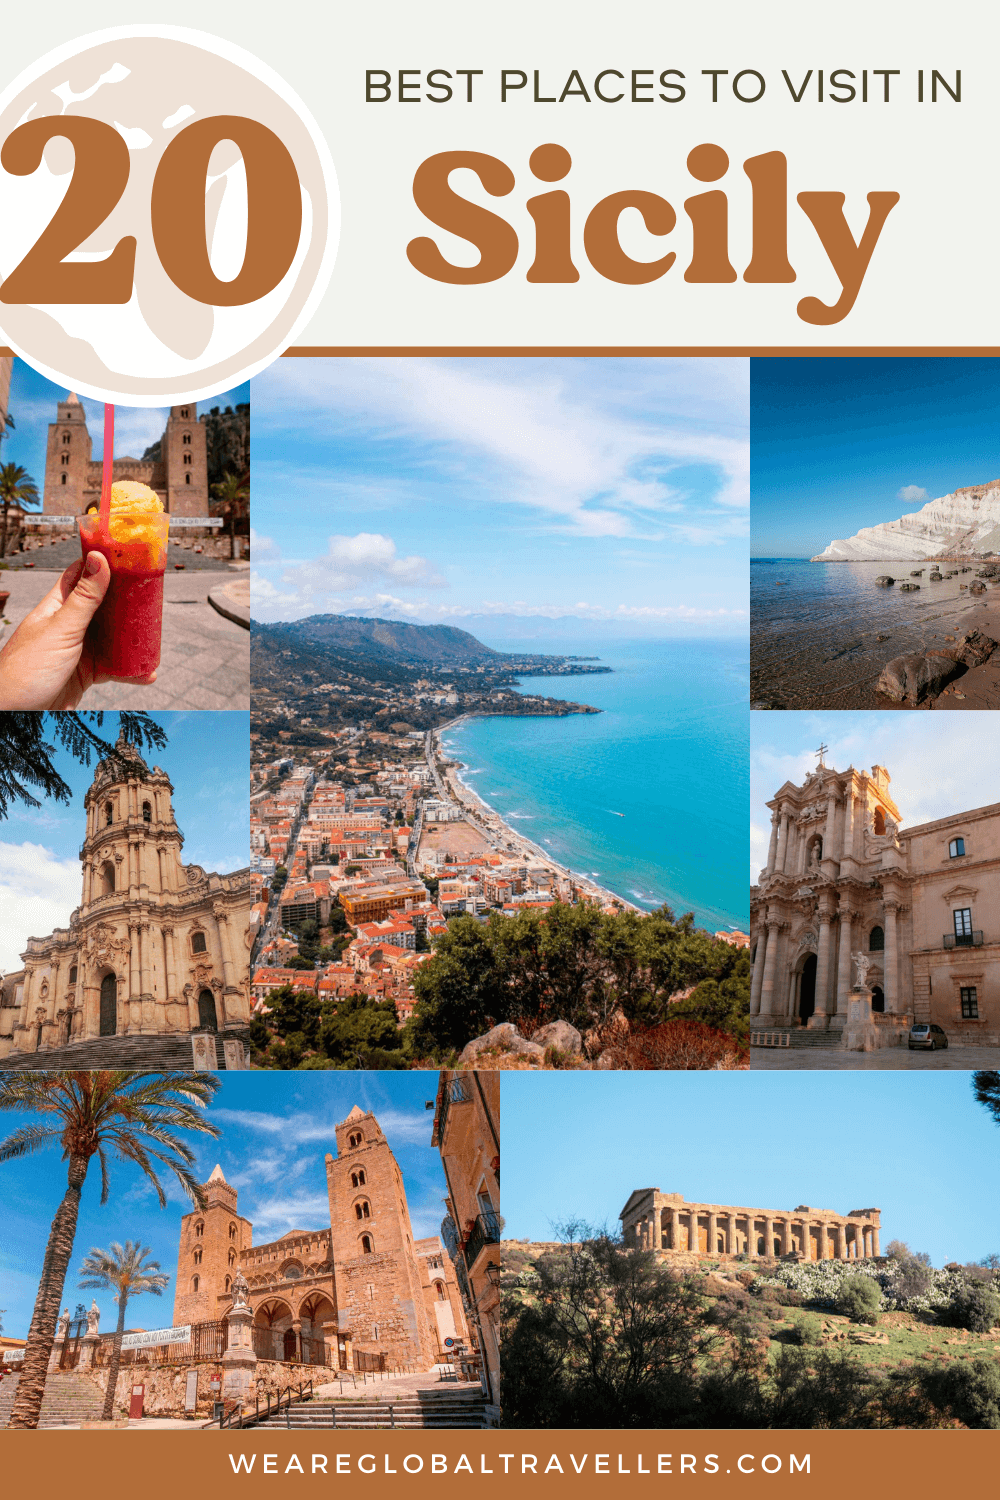 A Sicily bucket list: 20 of the best things to do